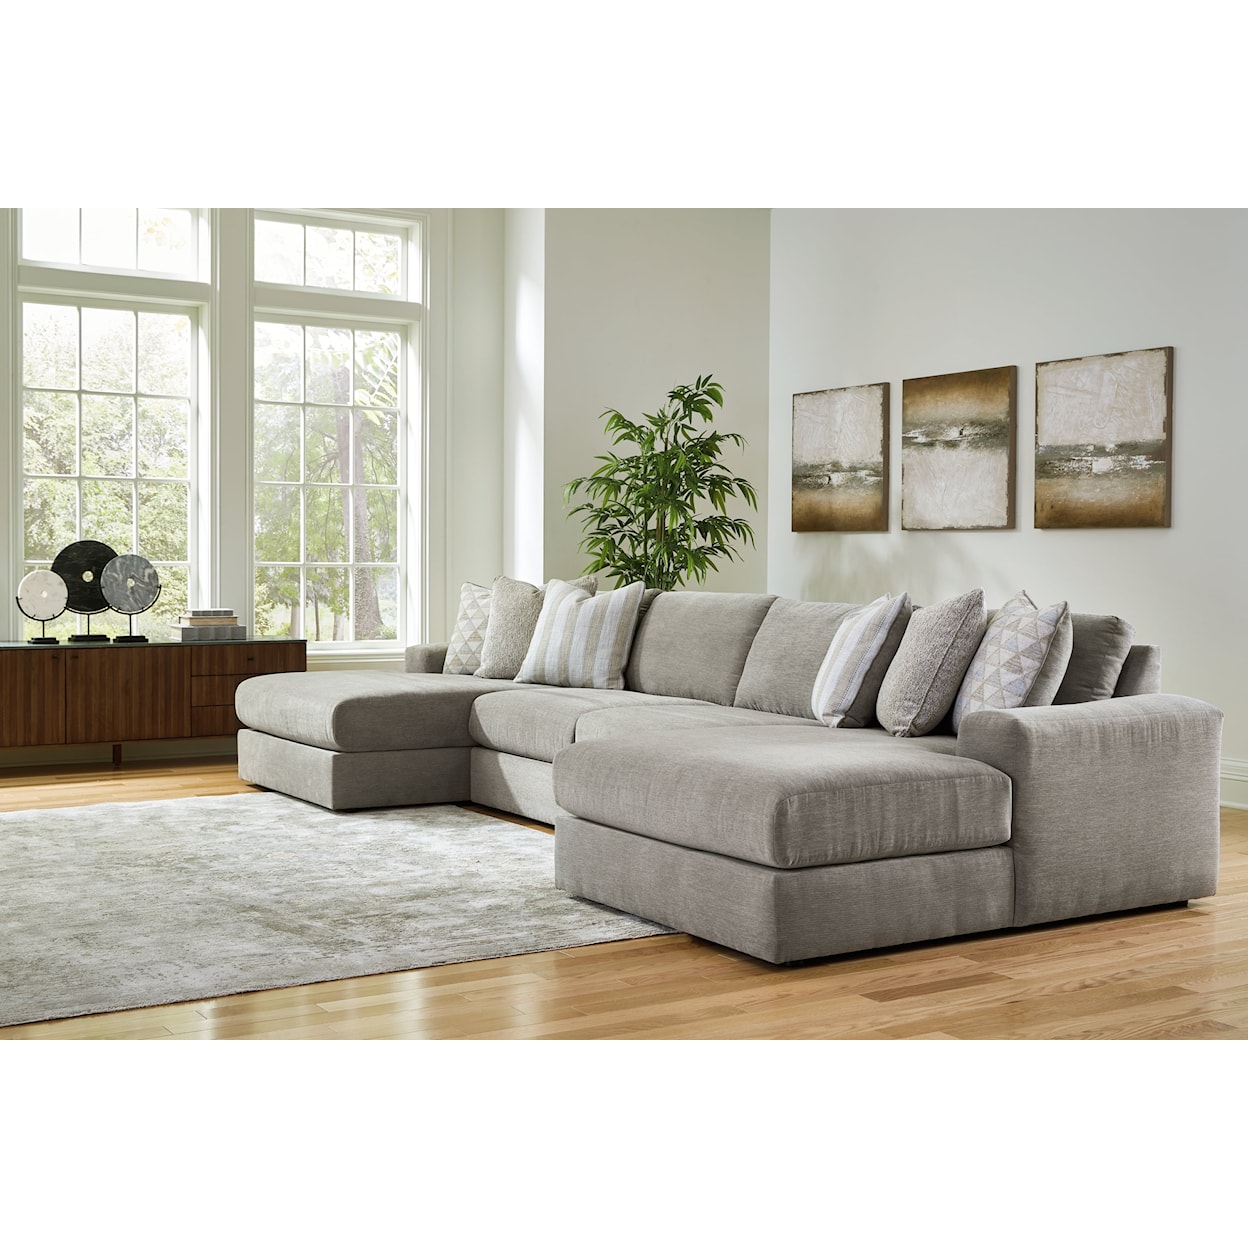 Signature Design Avaliyah 4-Piece Double Chaise Sectional